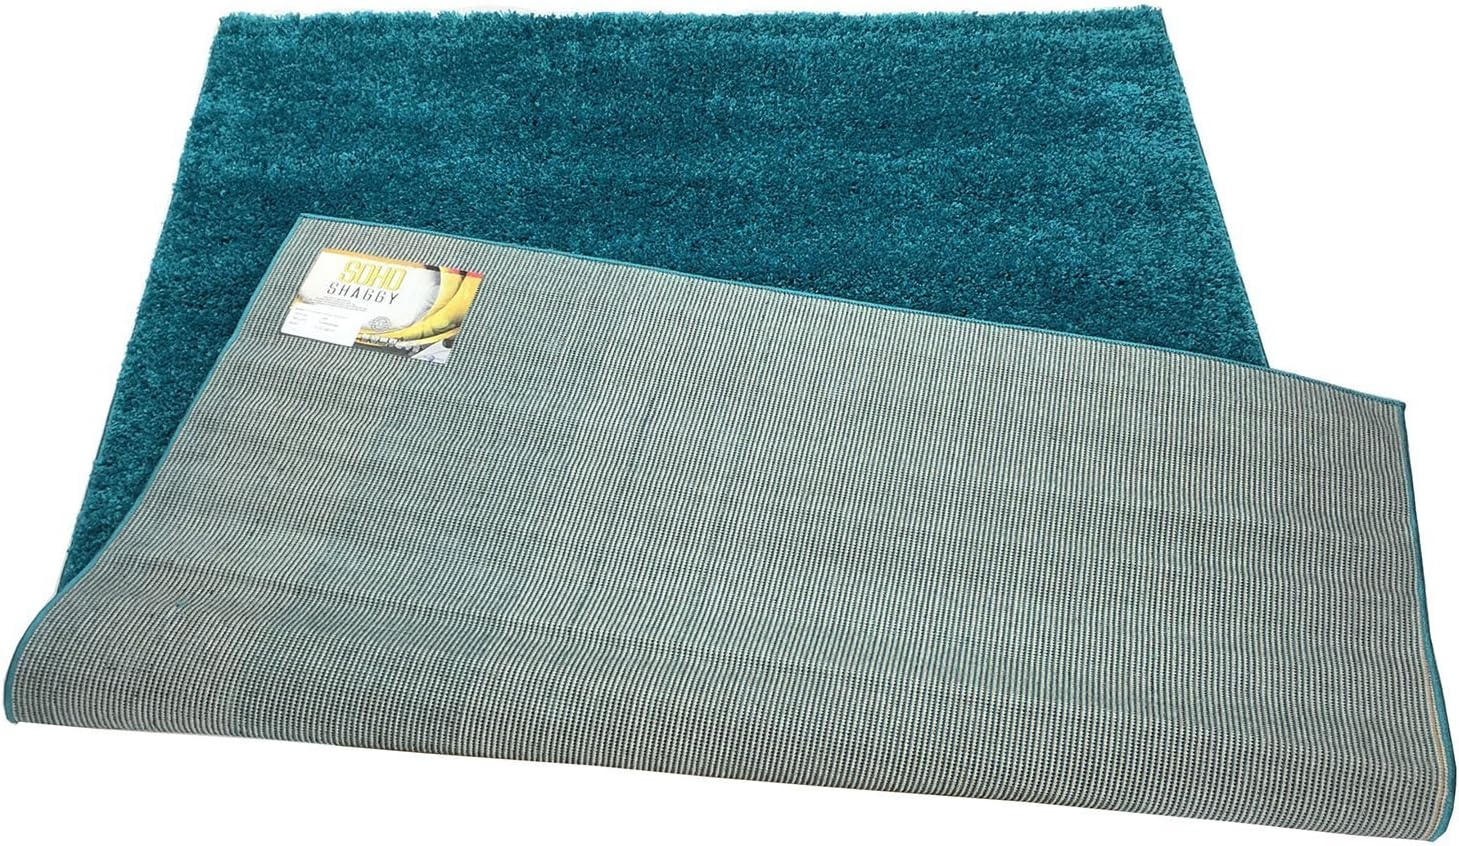 SOHO Shaggy Collection Solid Color Shag Area Rug (Turquoise Blue, 5 x 7)